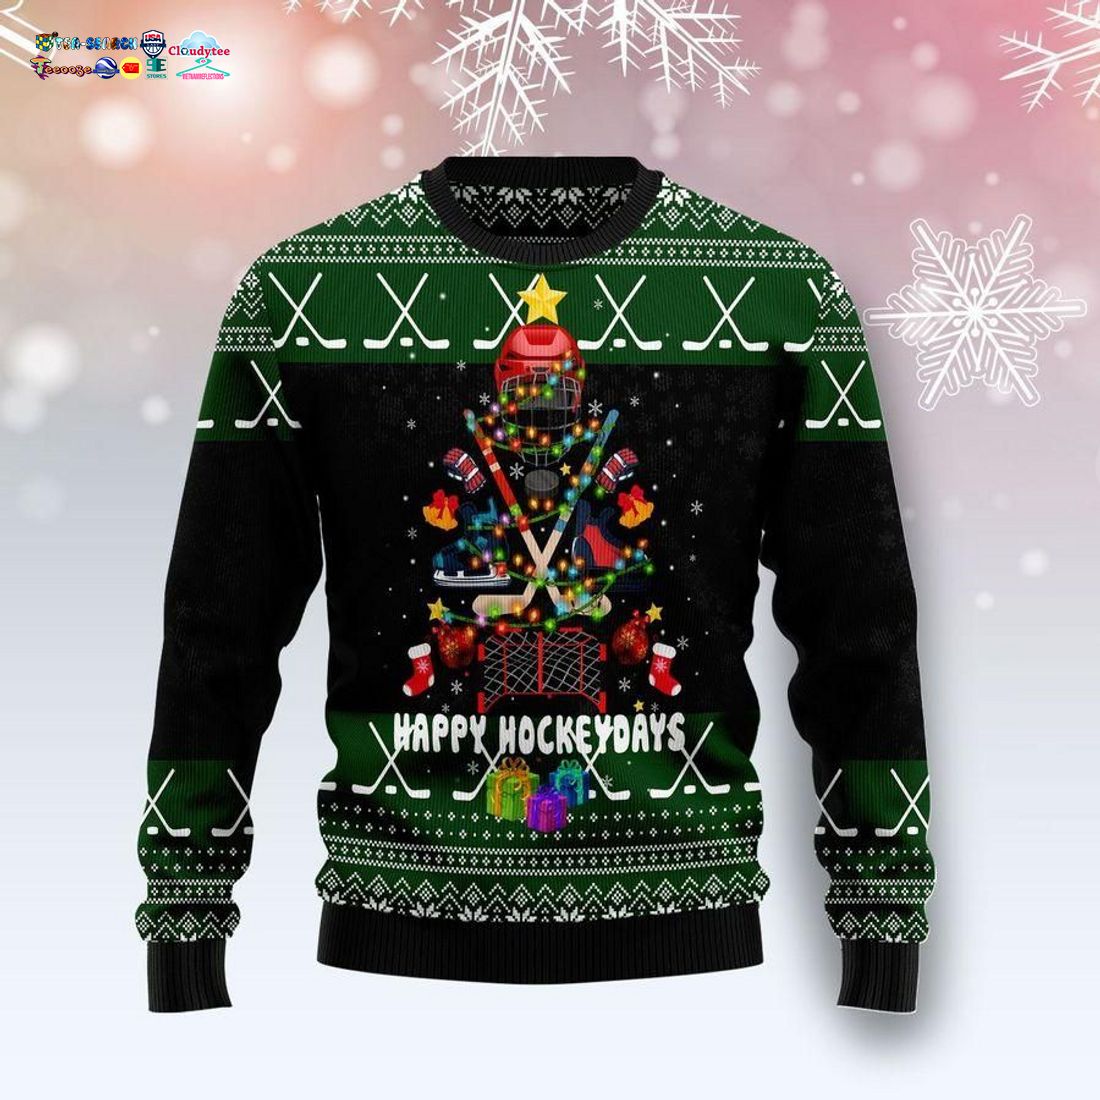 Happy Hockeydays Ugly Christmas Sweater - Handsome as usual